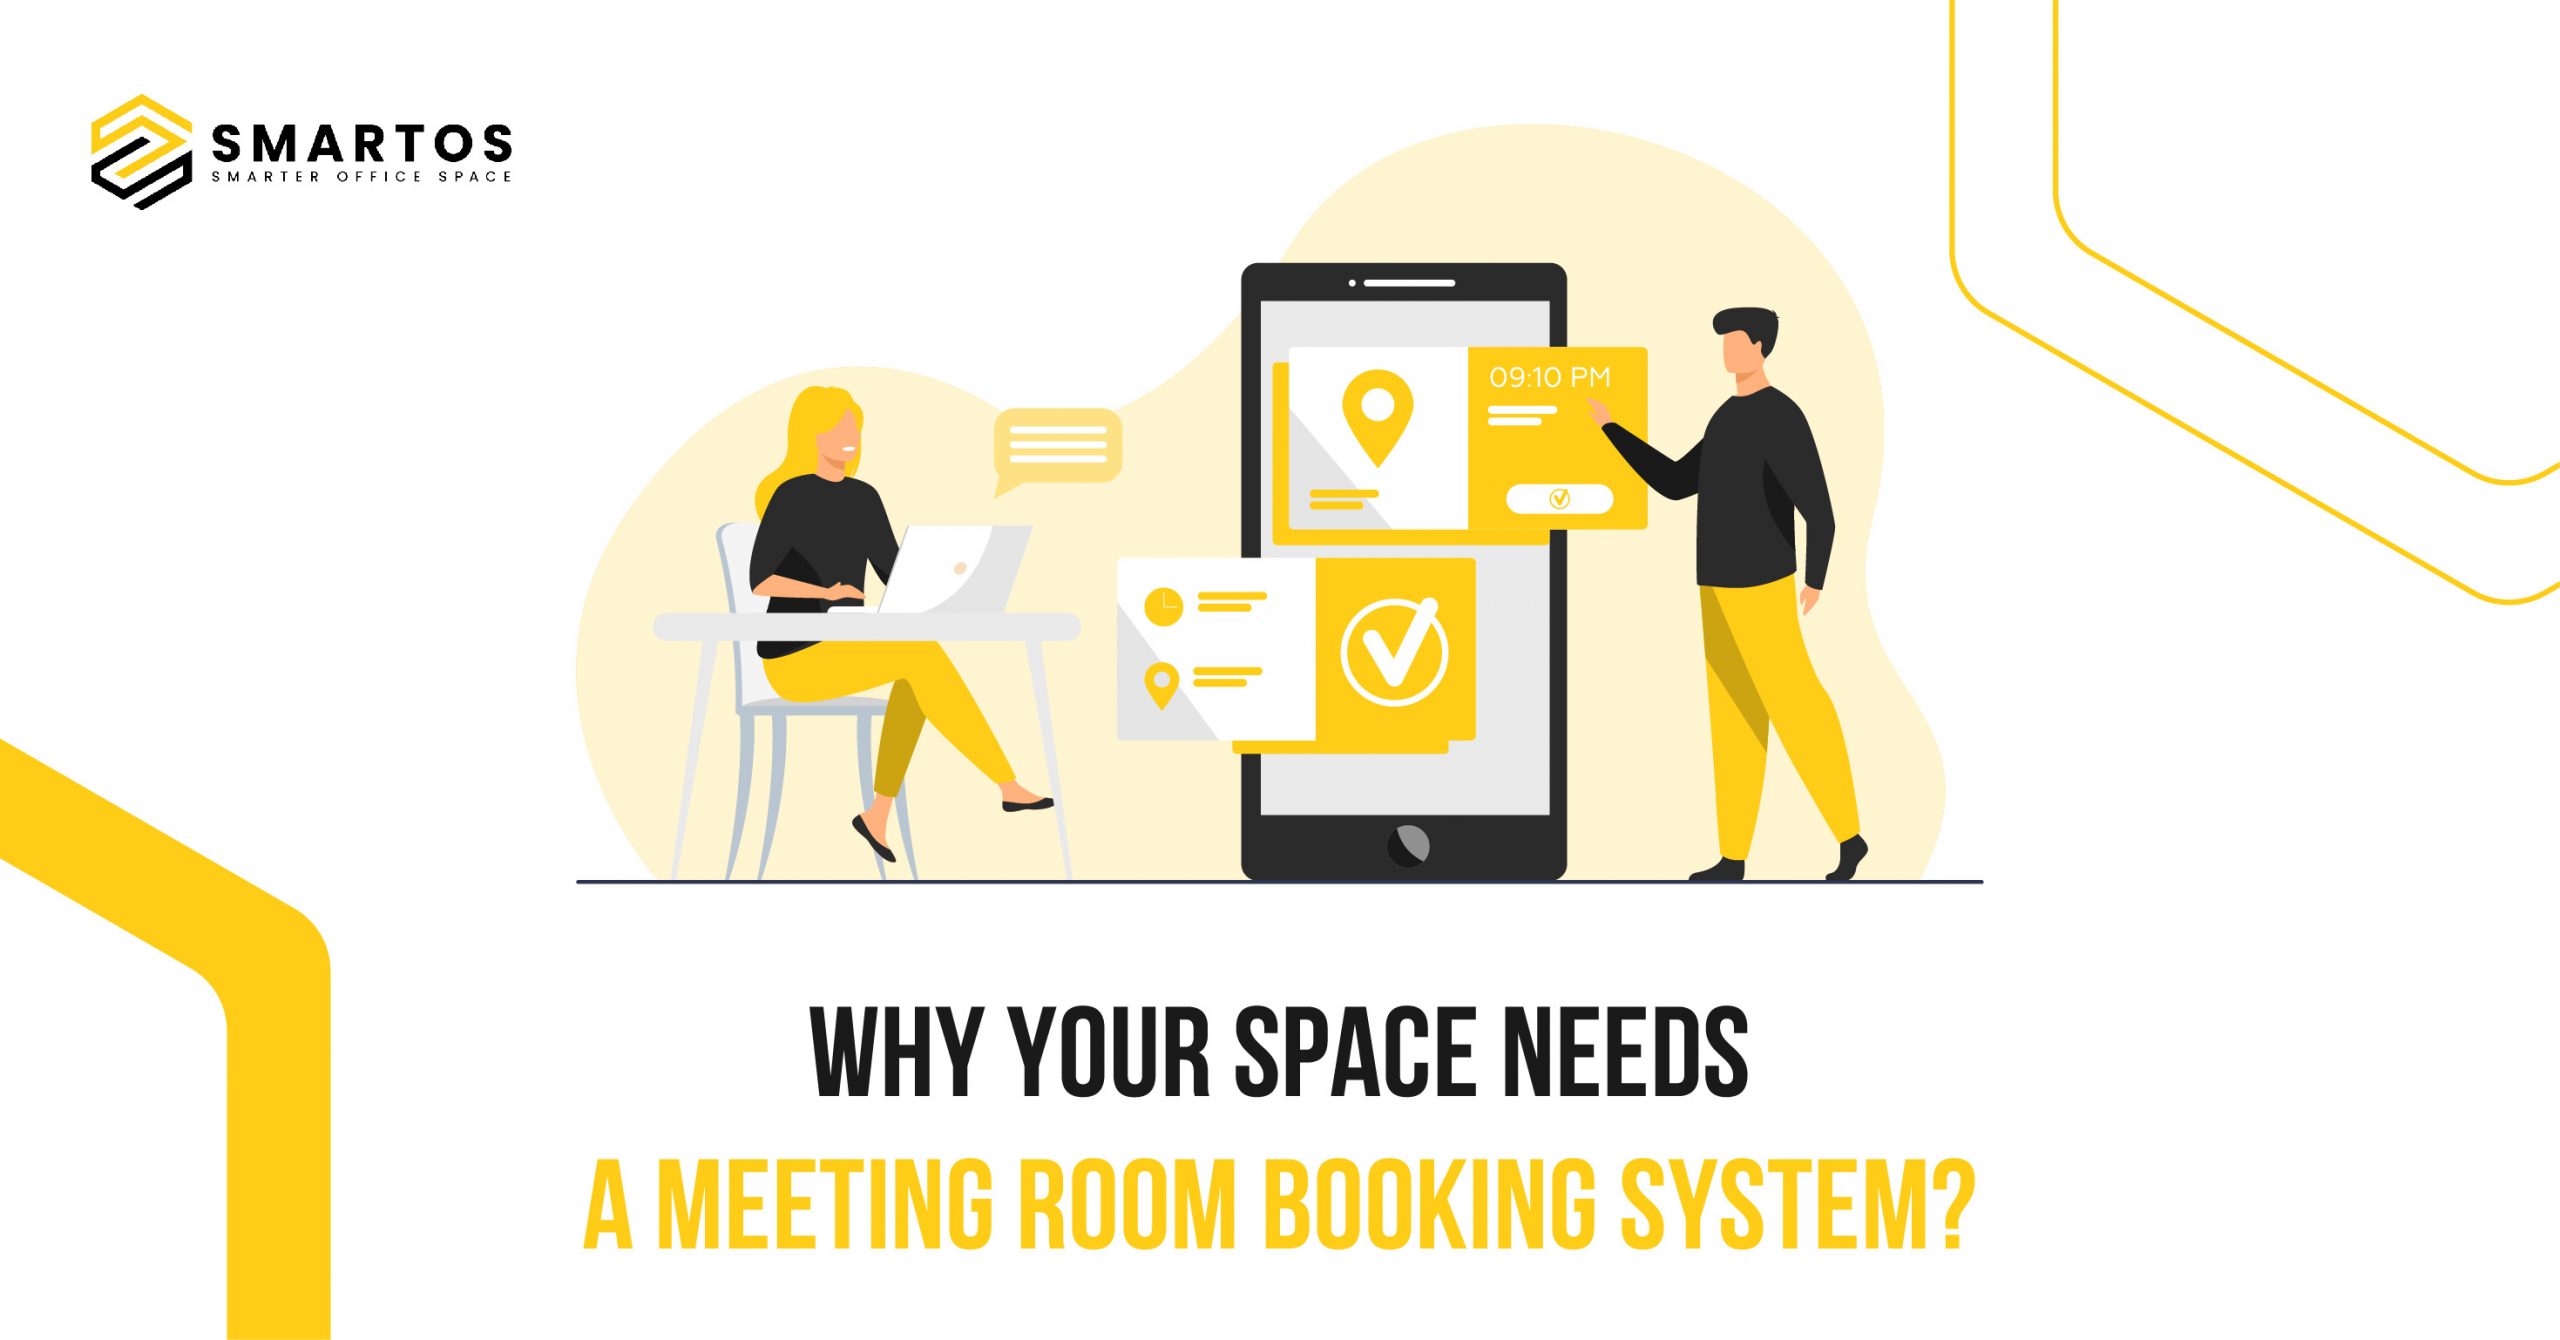 Why Your Space Needs a Meeting Room Booking System?